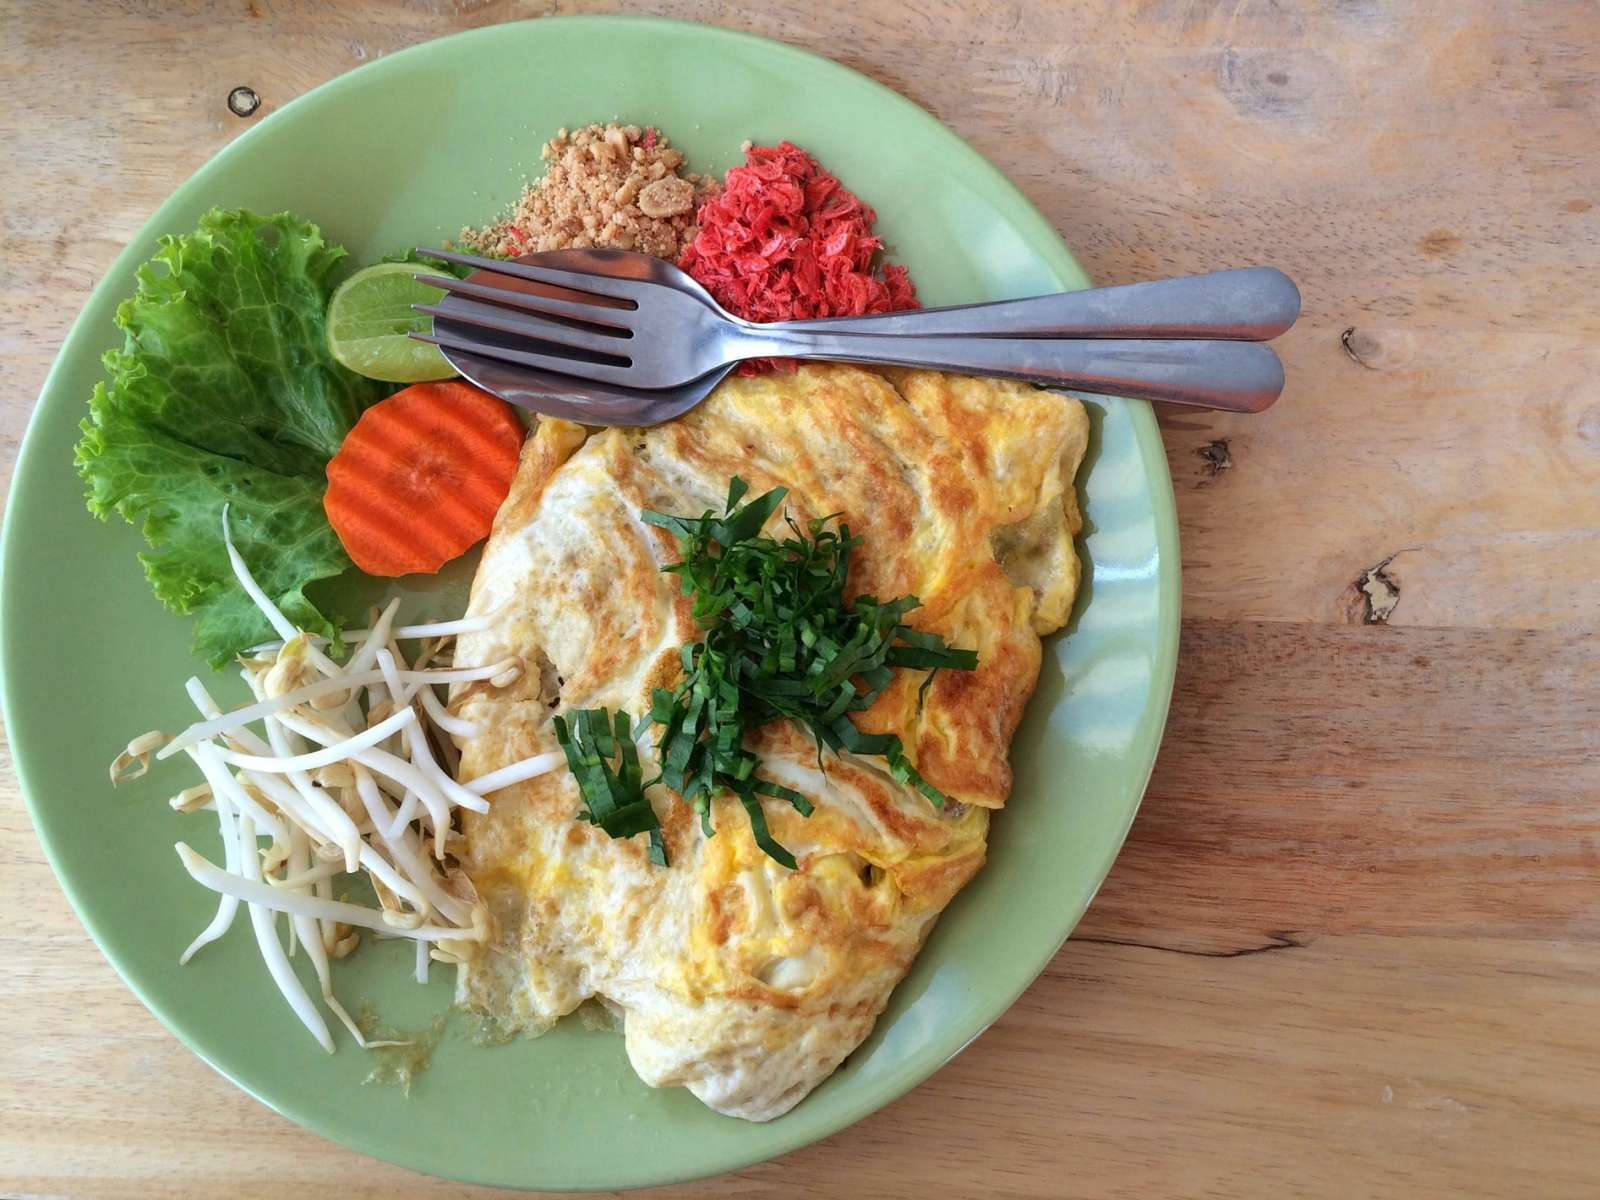 Authentic Top View of Green Thai Curry Omelette Wallpaper